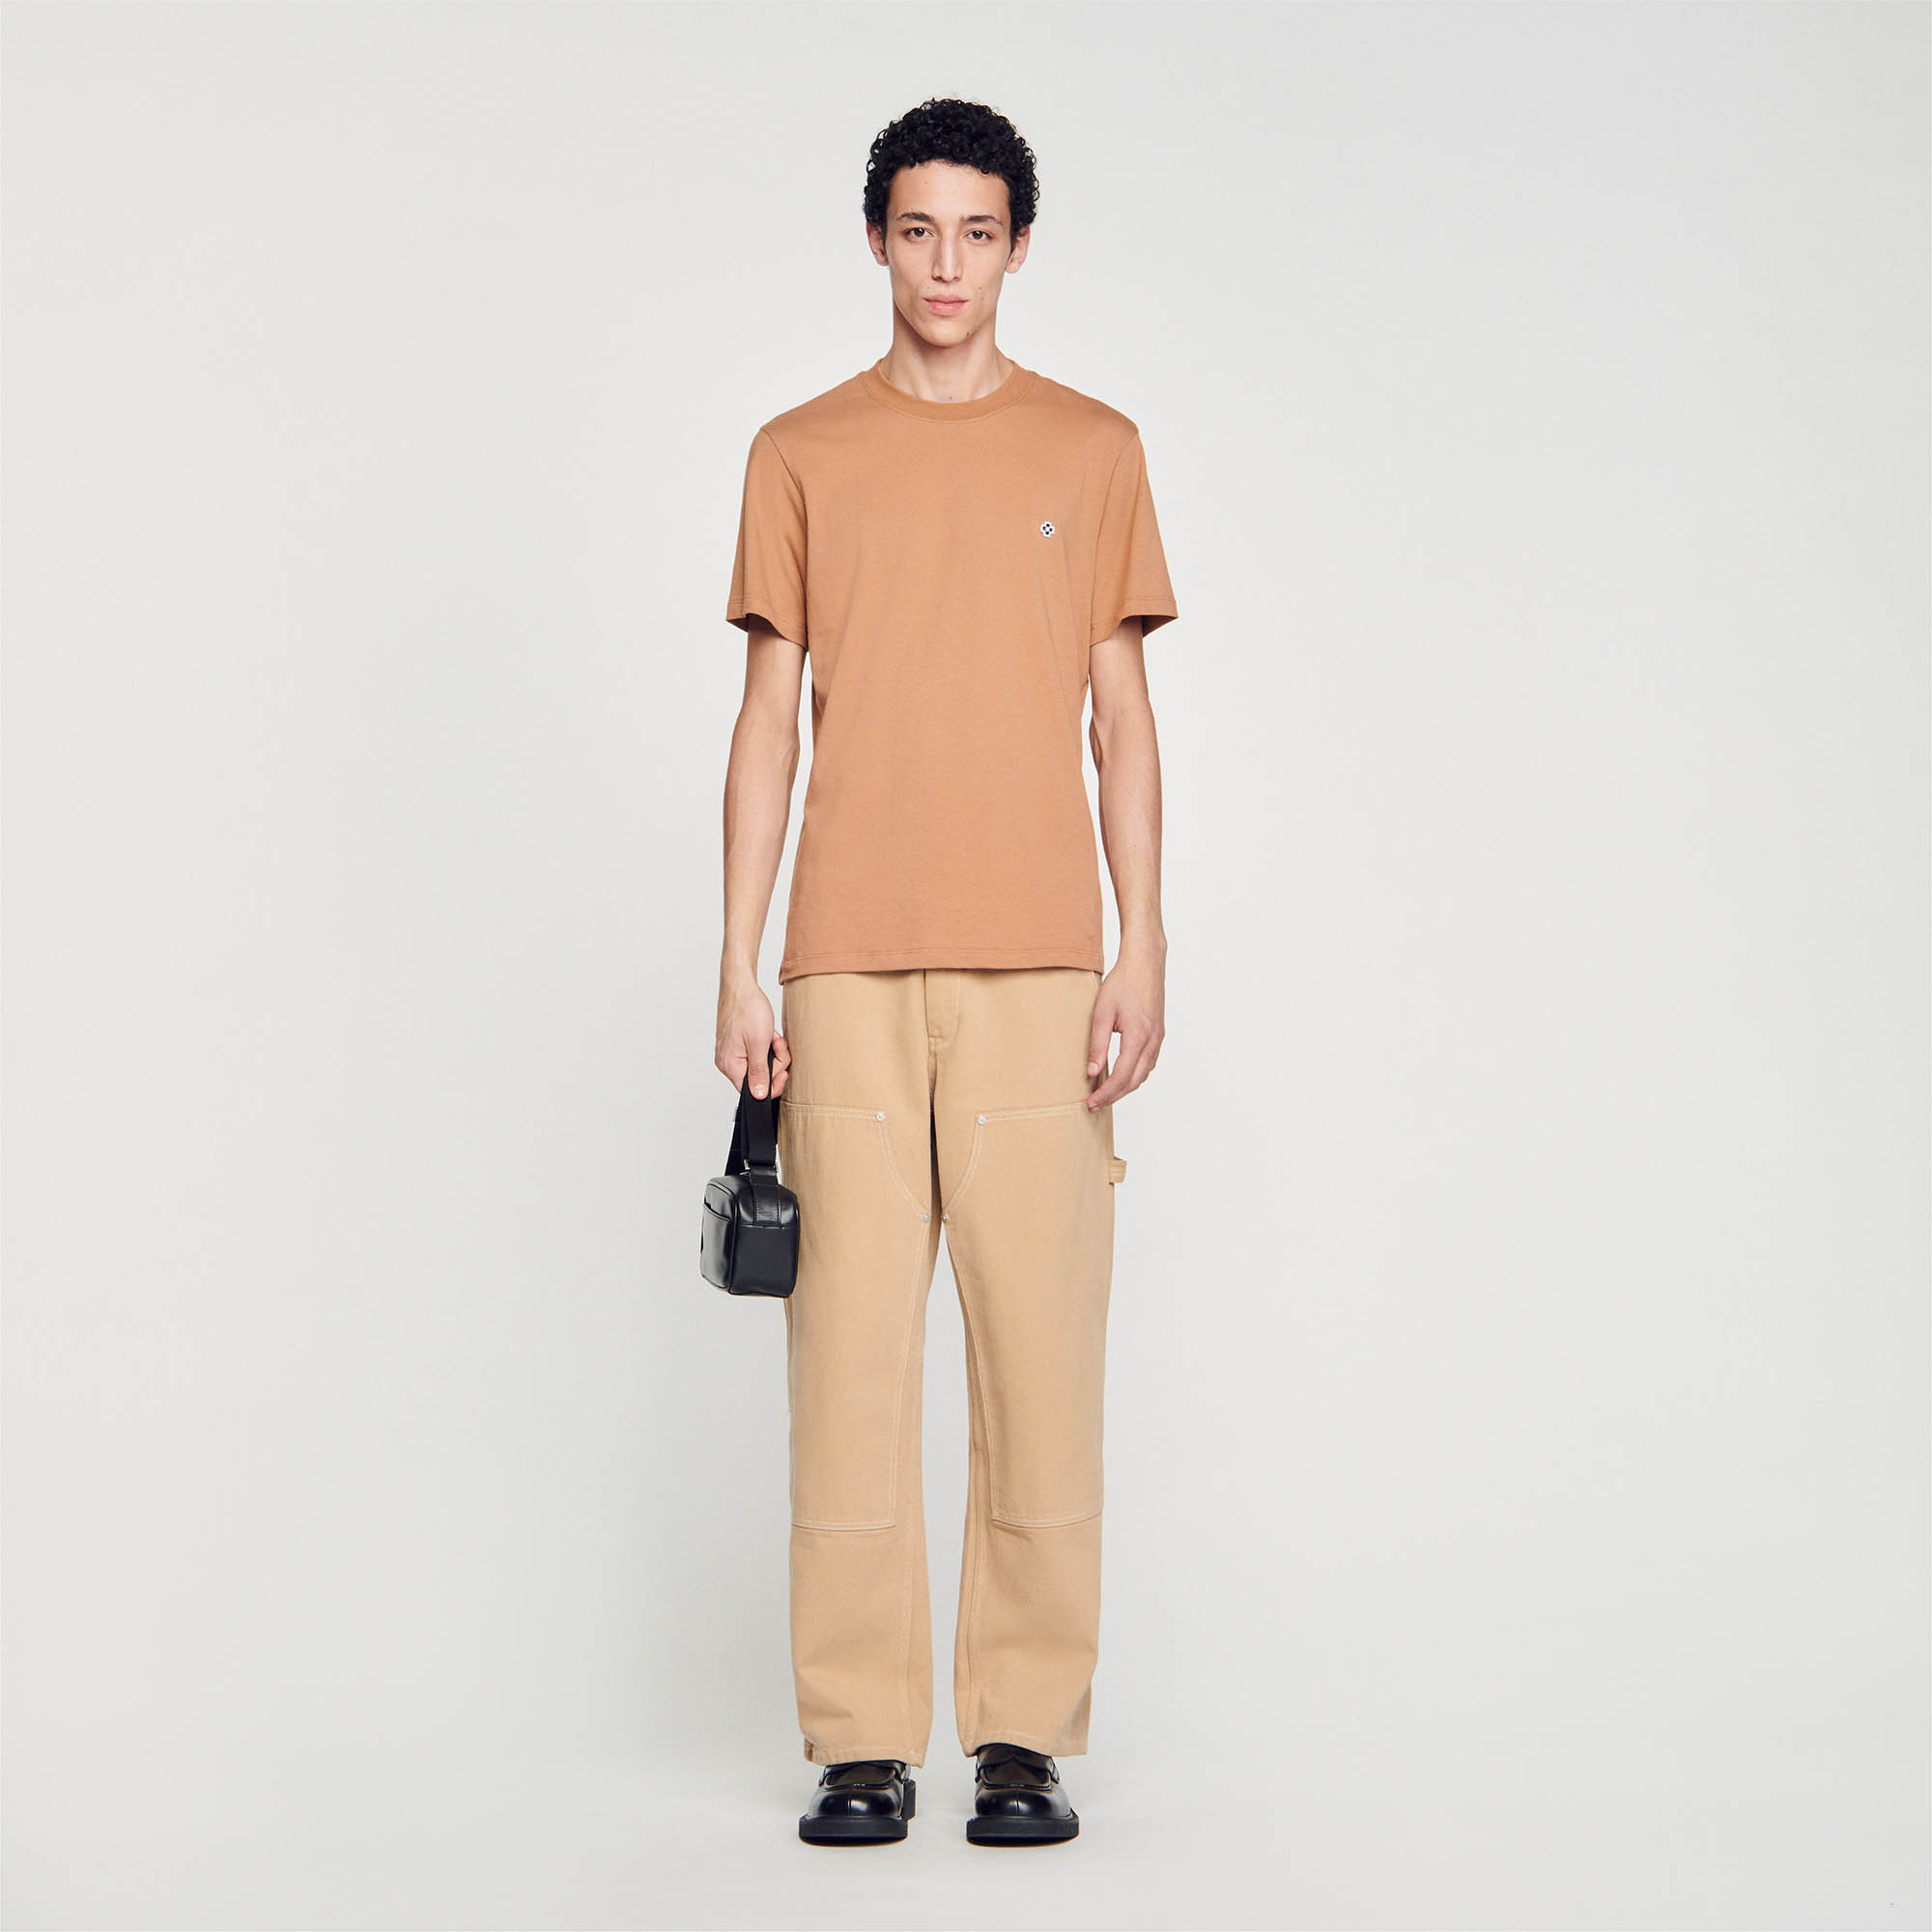 Sandro cotton Patch: Cotton T-shirt with a round neck, short sleeves and a mini Square Cross patch on the chest